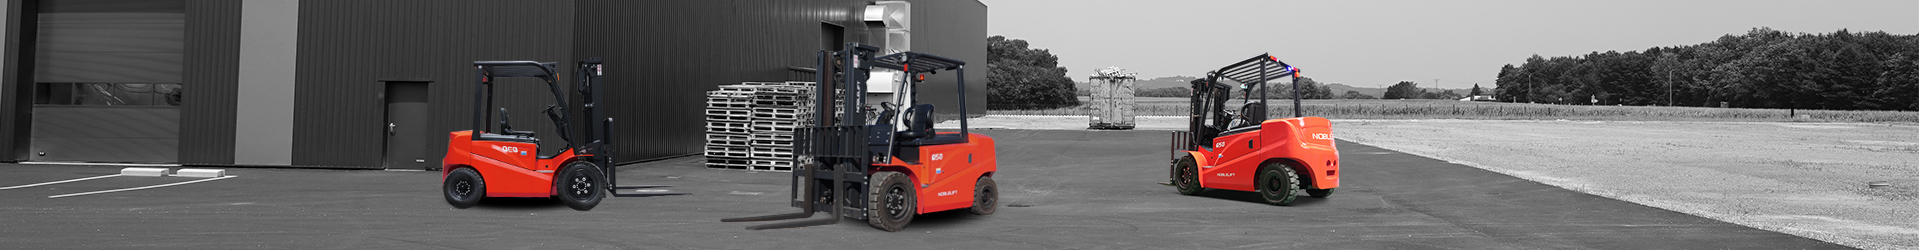 4-wheel electric forklifts